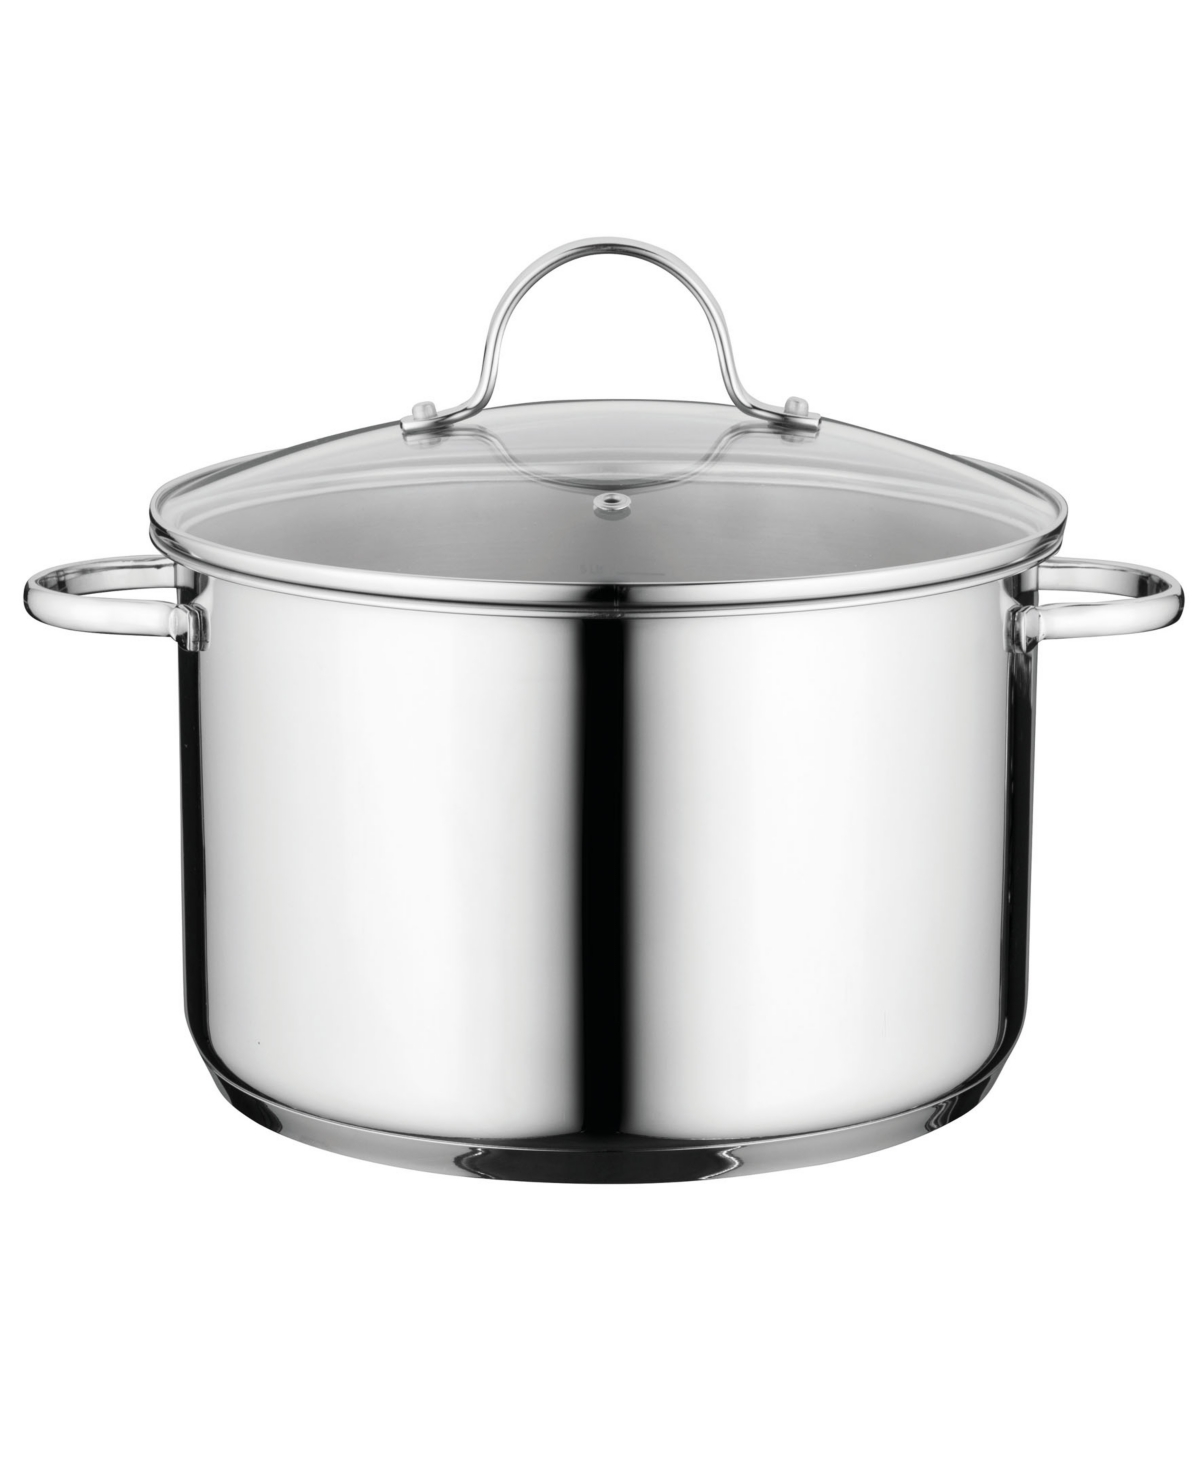 BergHOFF Comfort Stainless Steel 10 Covered Stockpot